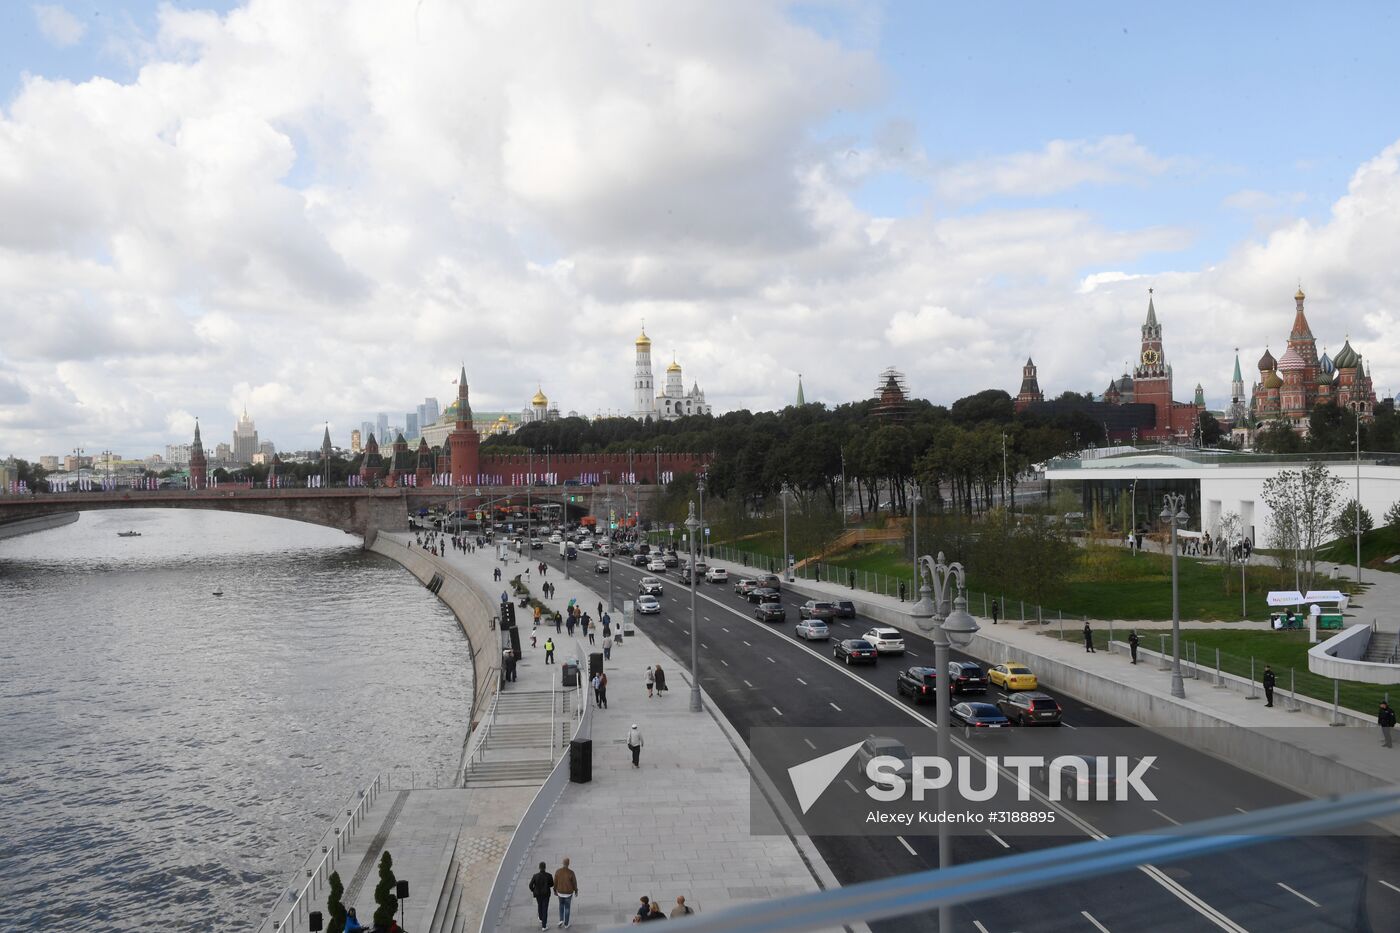 Zaryadye Park is opened in Moscow